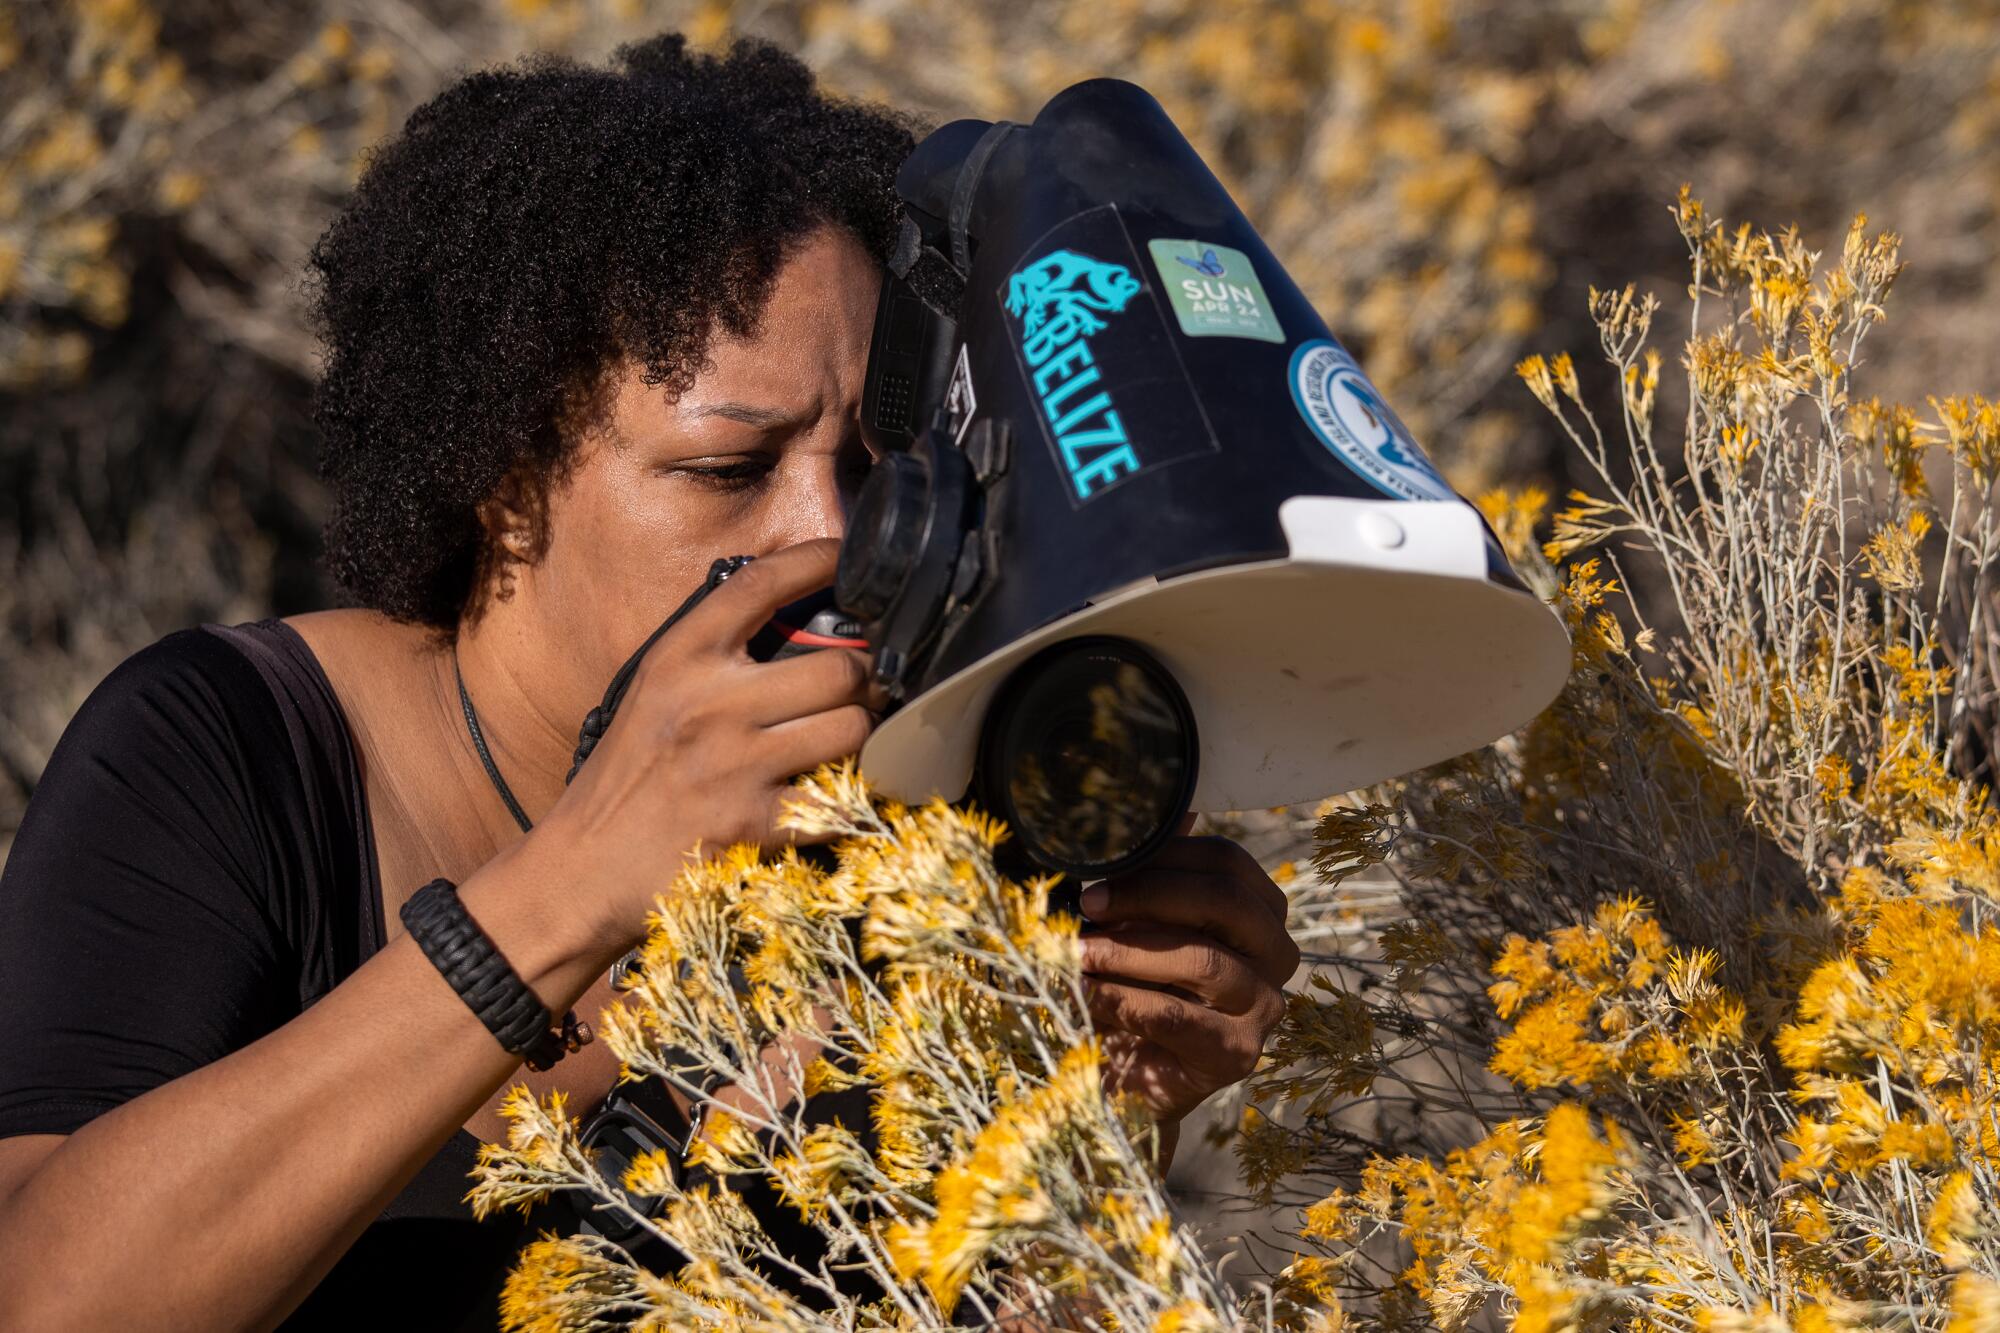 Krystle Hickman photographing a honey bee on a rabbit bush in a desert environment.